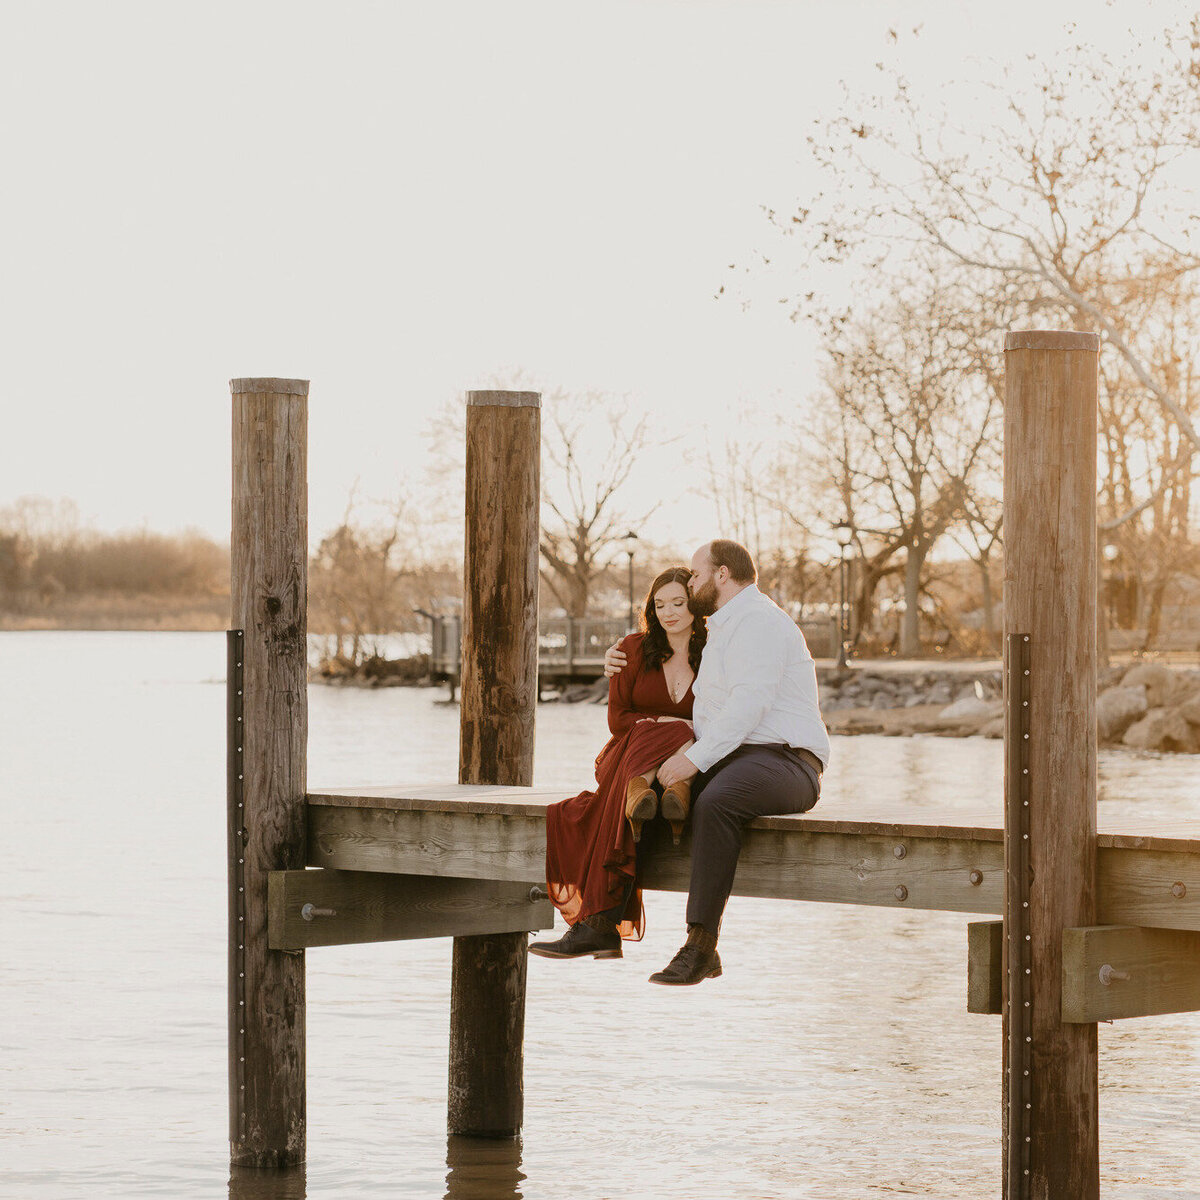 Engagement photo on a dock